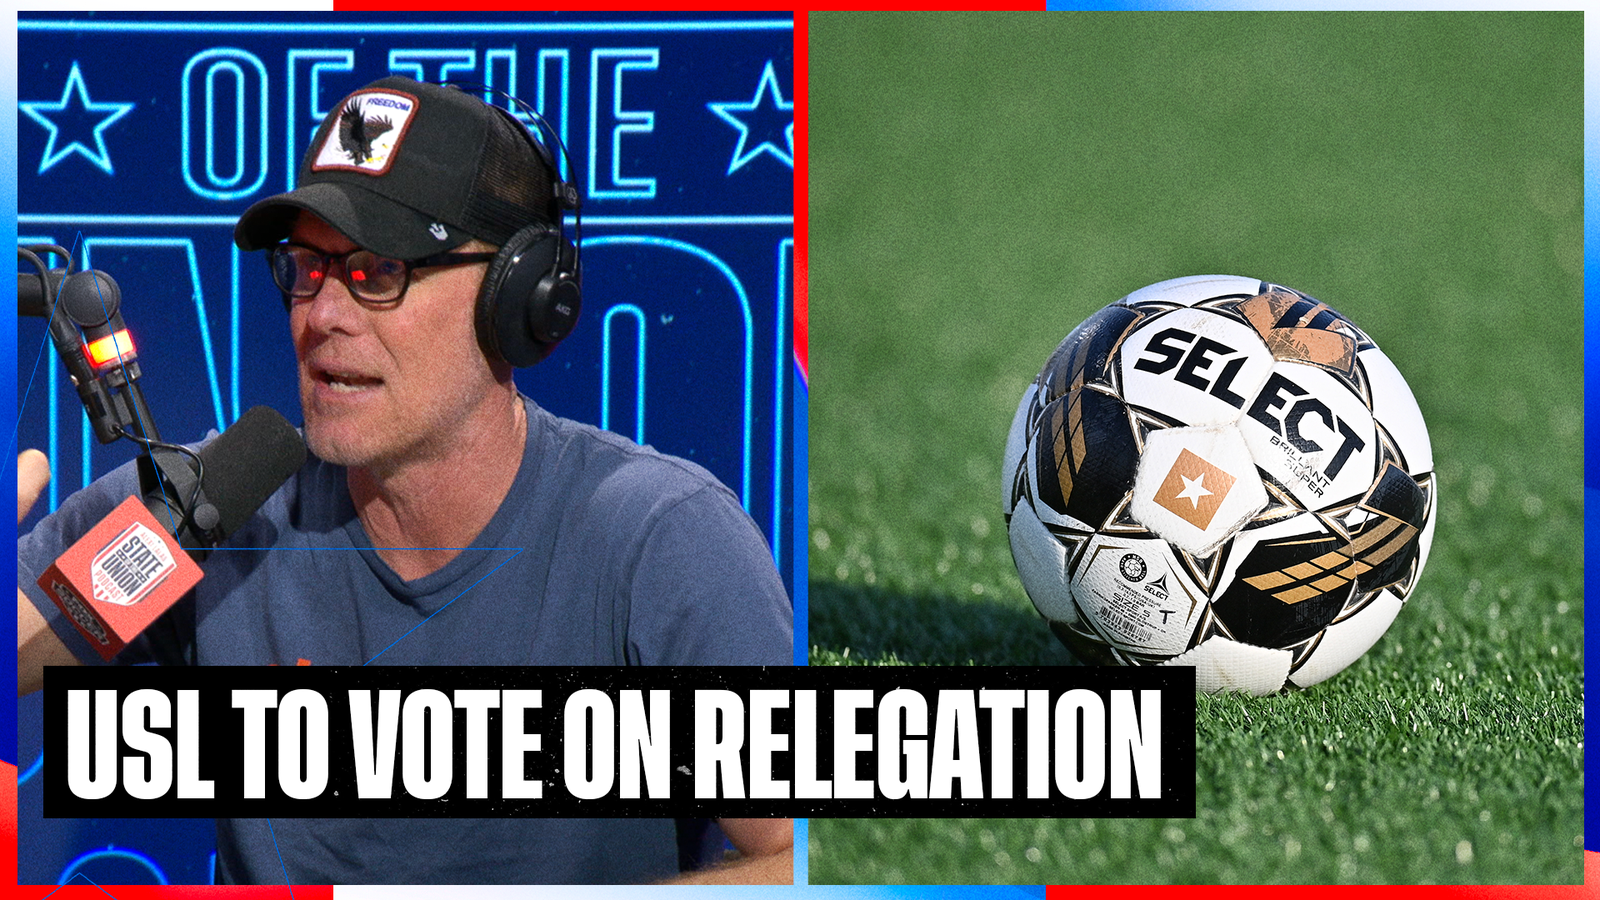 Alexi Lalas reacts to the USL preparing to vote for promotion/relegation